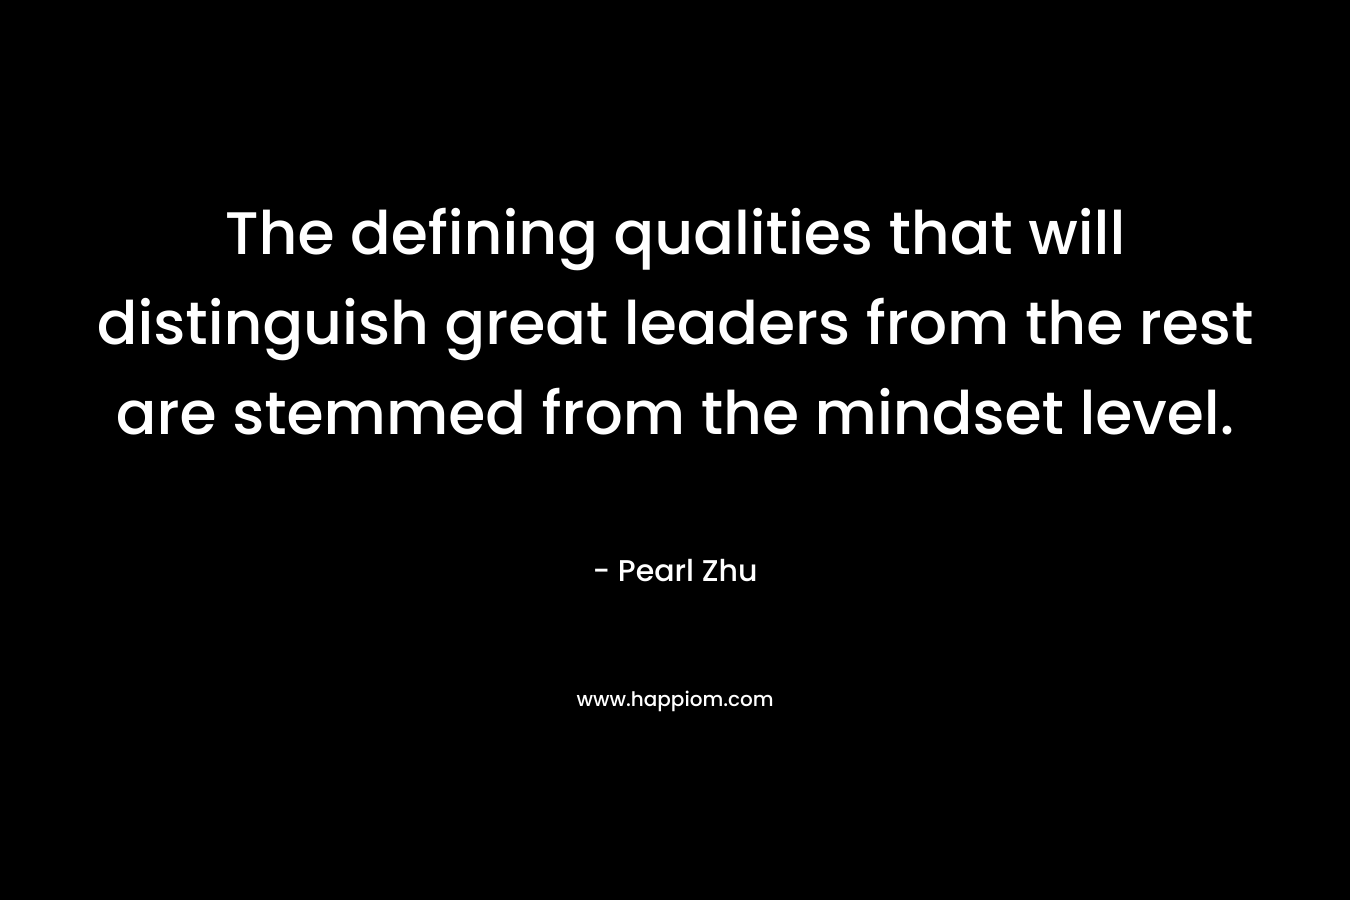 The defining qualities that will distinguish great leaders from the rest are stemmed from the mindset level.